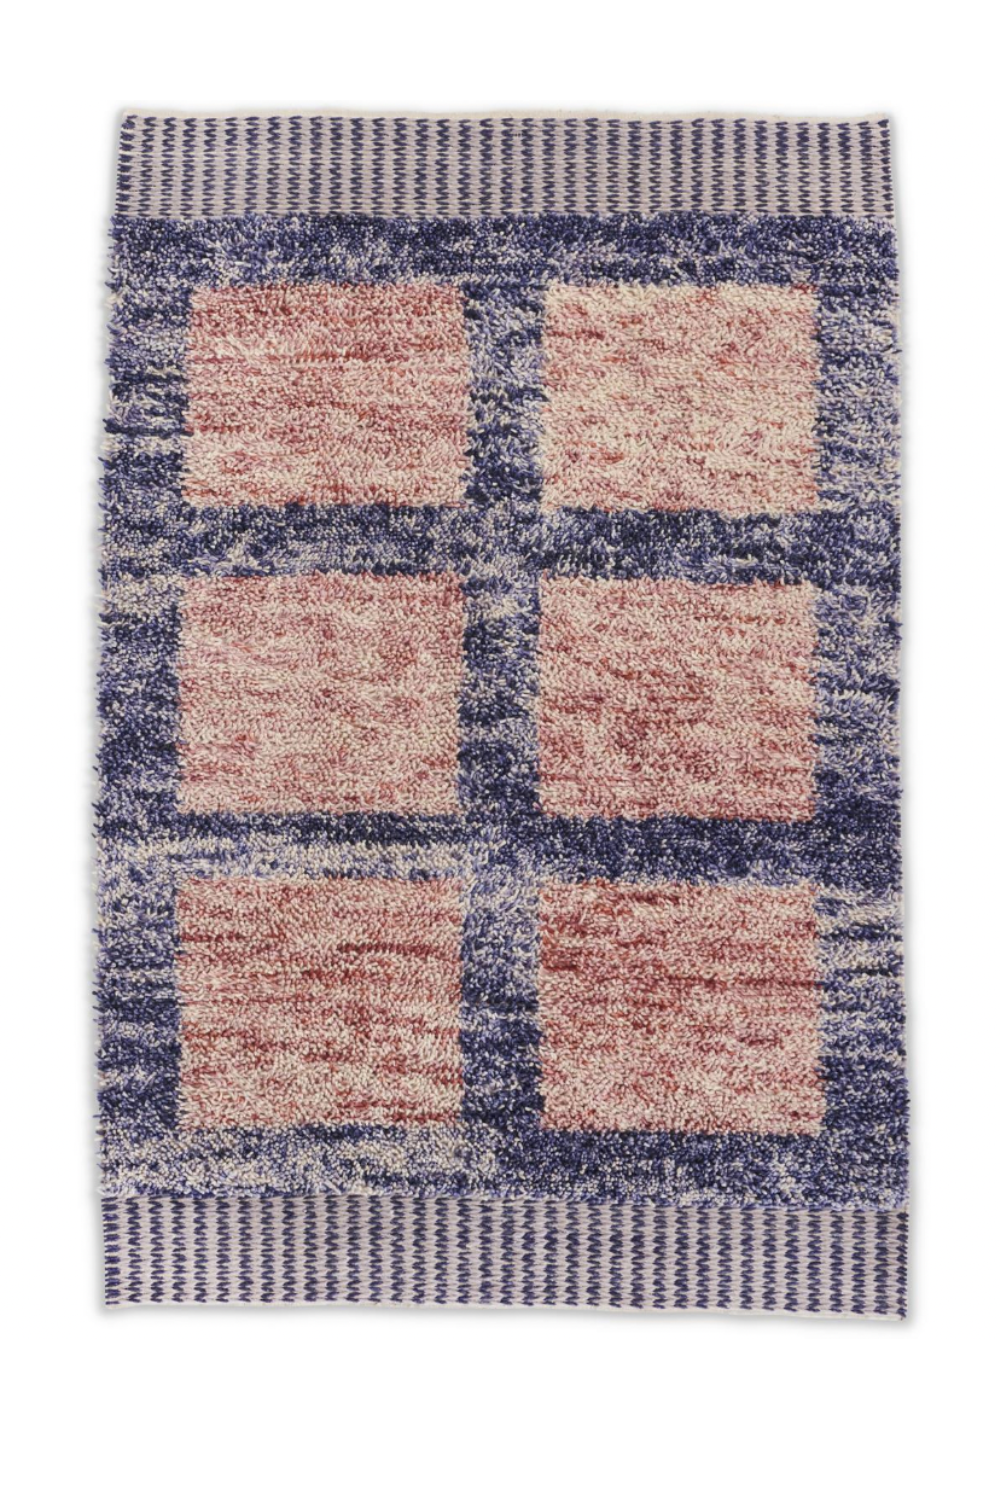 Bohemian Felted Wool Rug 6x9 ft